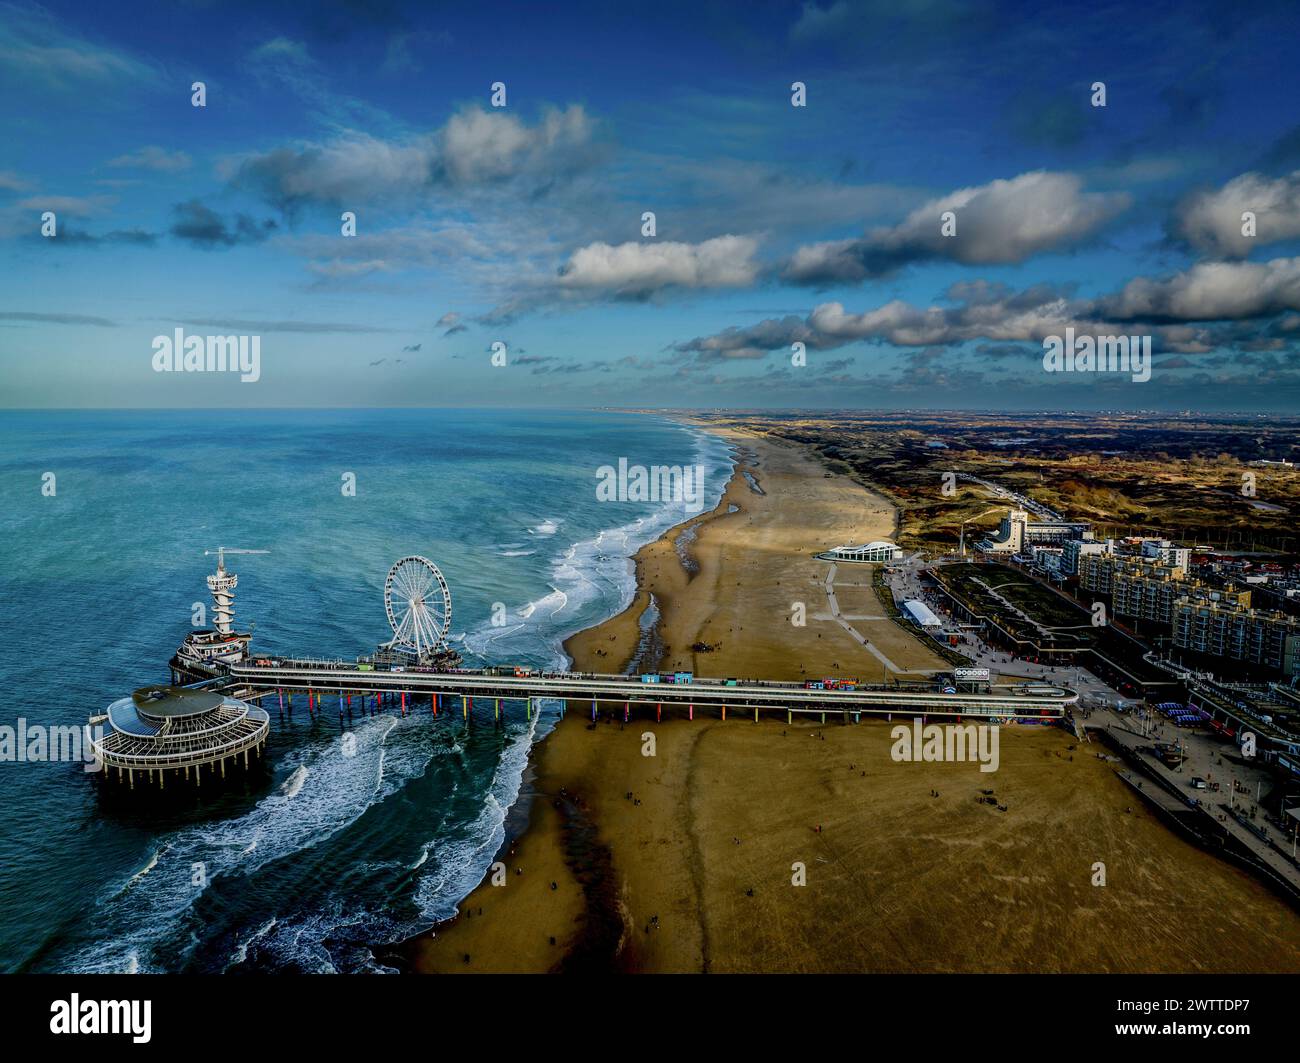 Aerial view of a vibrant coastal city with a bustling pier and Ferris wheel Stock Photo